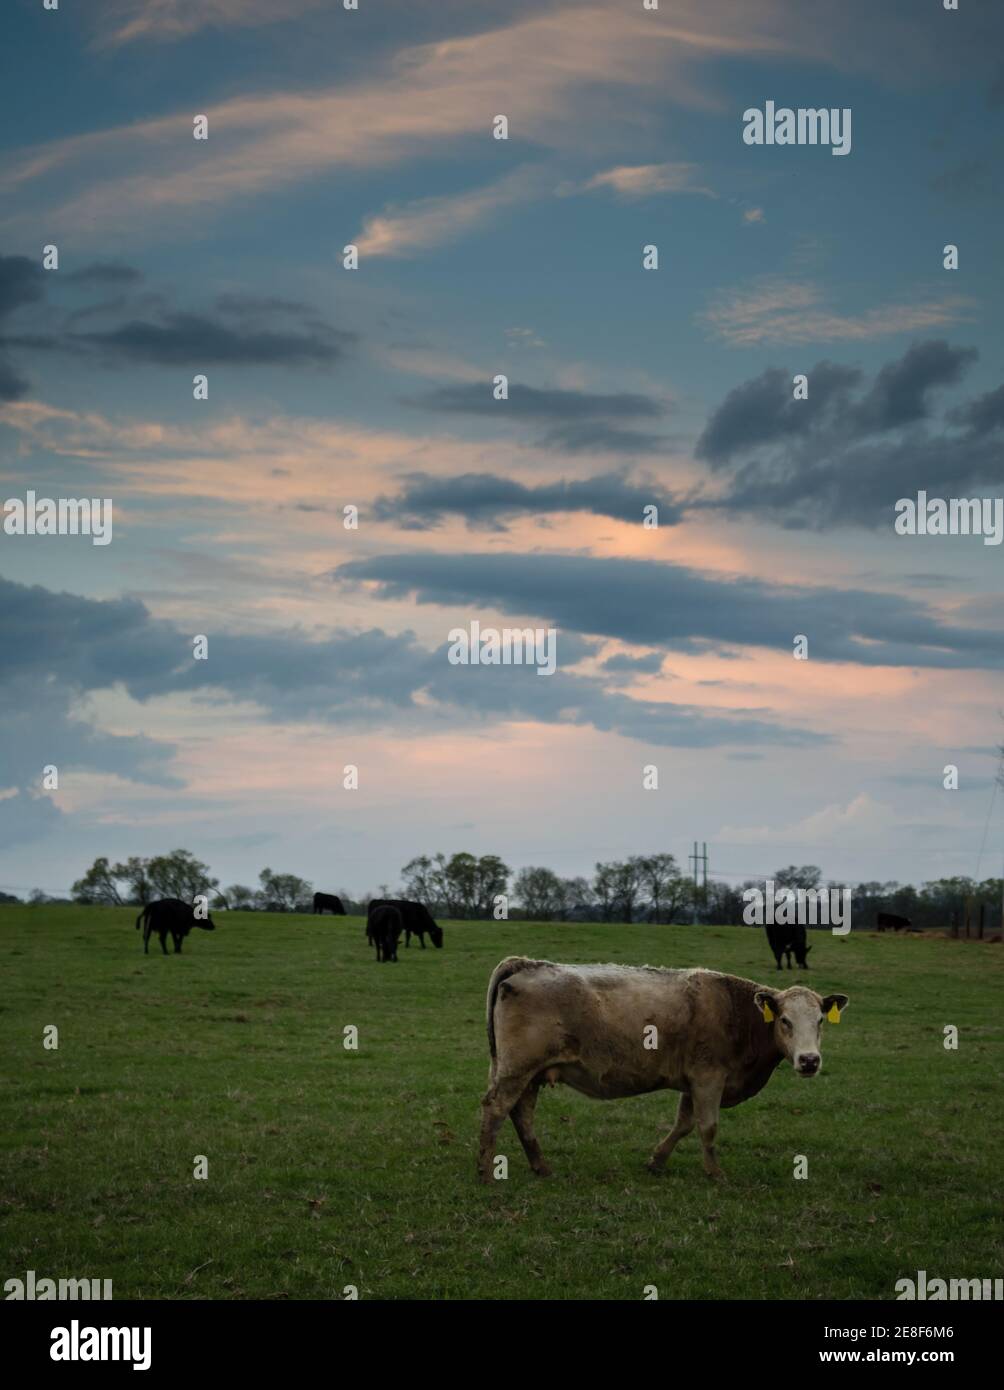 Brown commercial beef cow in the foreground with rest of the herd in the background with colorful sunset sky Stock Photo